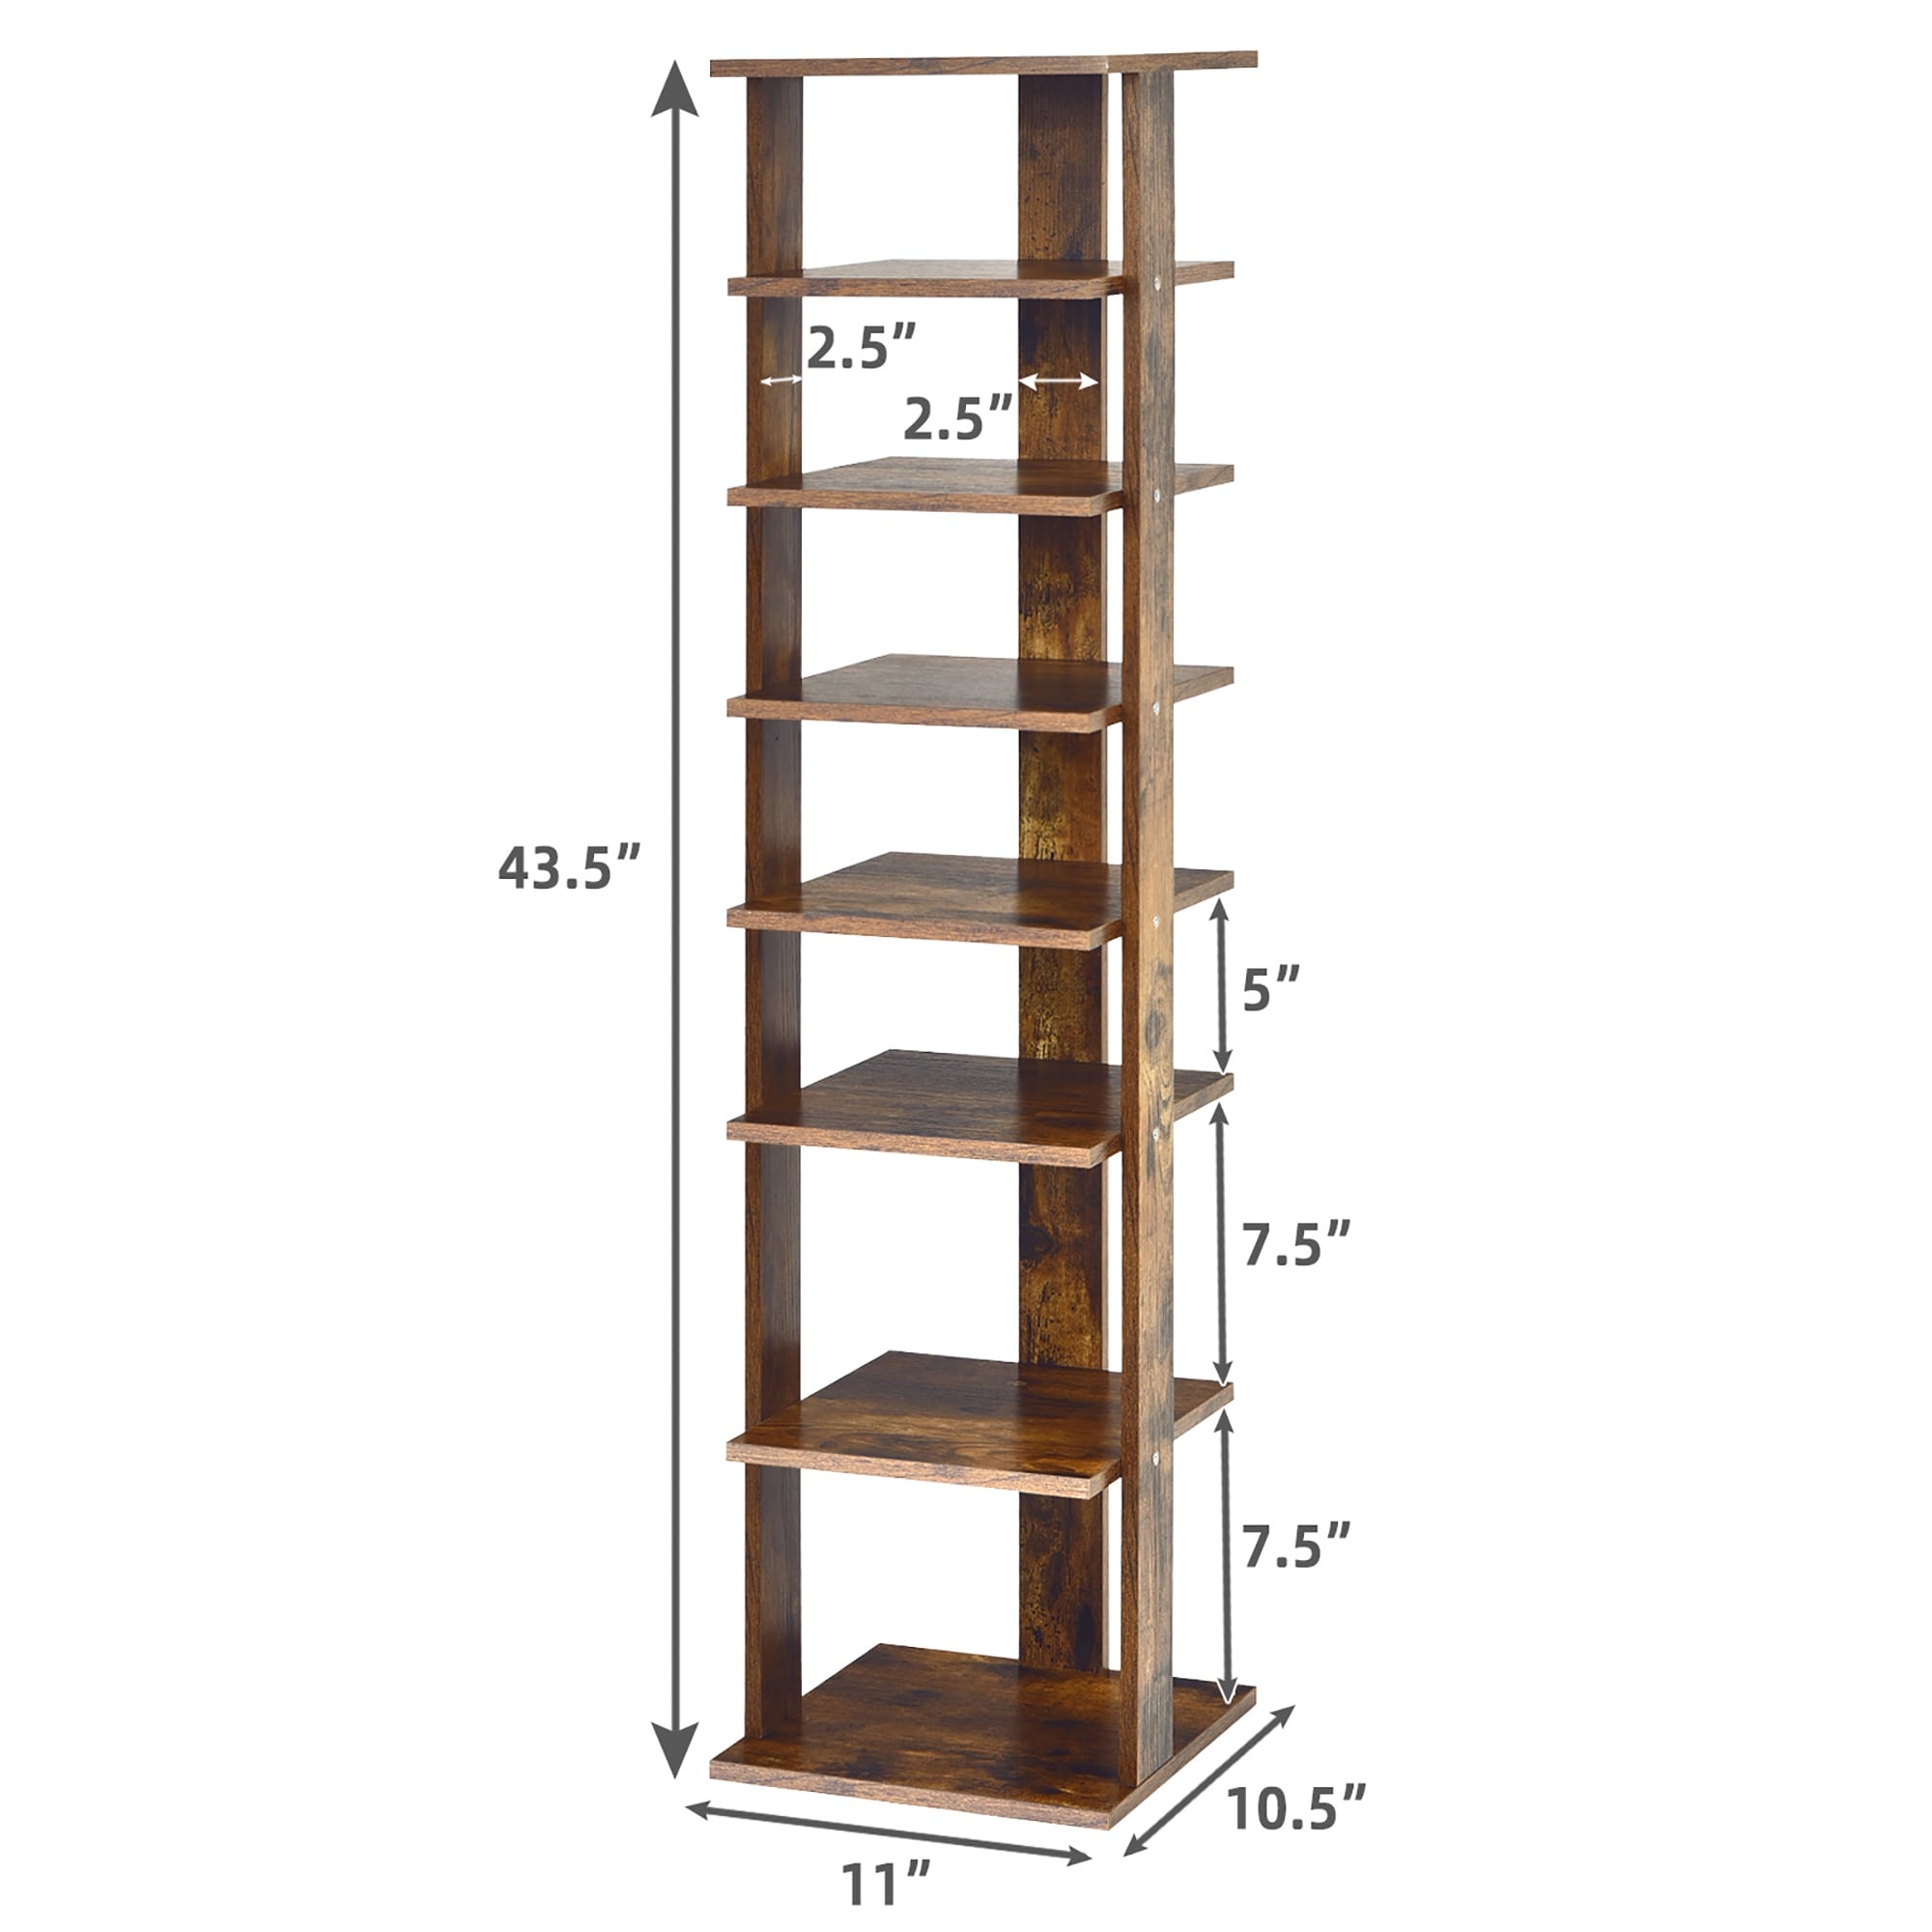 https://ak1.ostkcdn.com/images/products/is/images/direct/b34006874cec3dfe5ae78020b7a077c95c01dd21/7-Tiers-Vertical-Shoe-Rack-Entryway-Slim-Wooden-Shoes-Racks.jpg